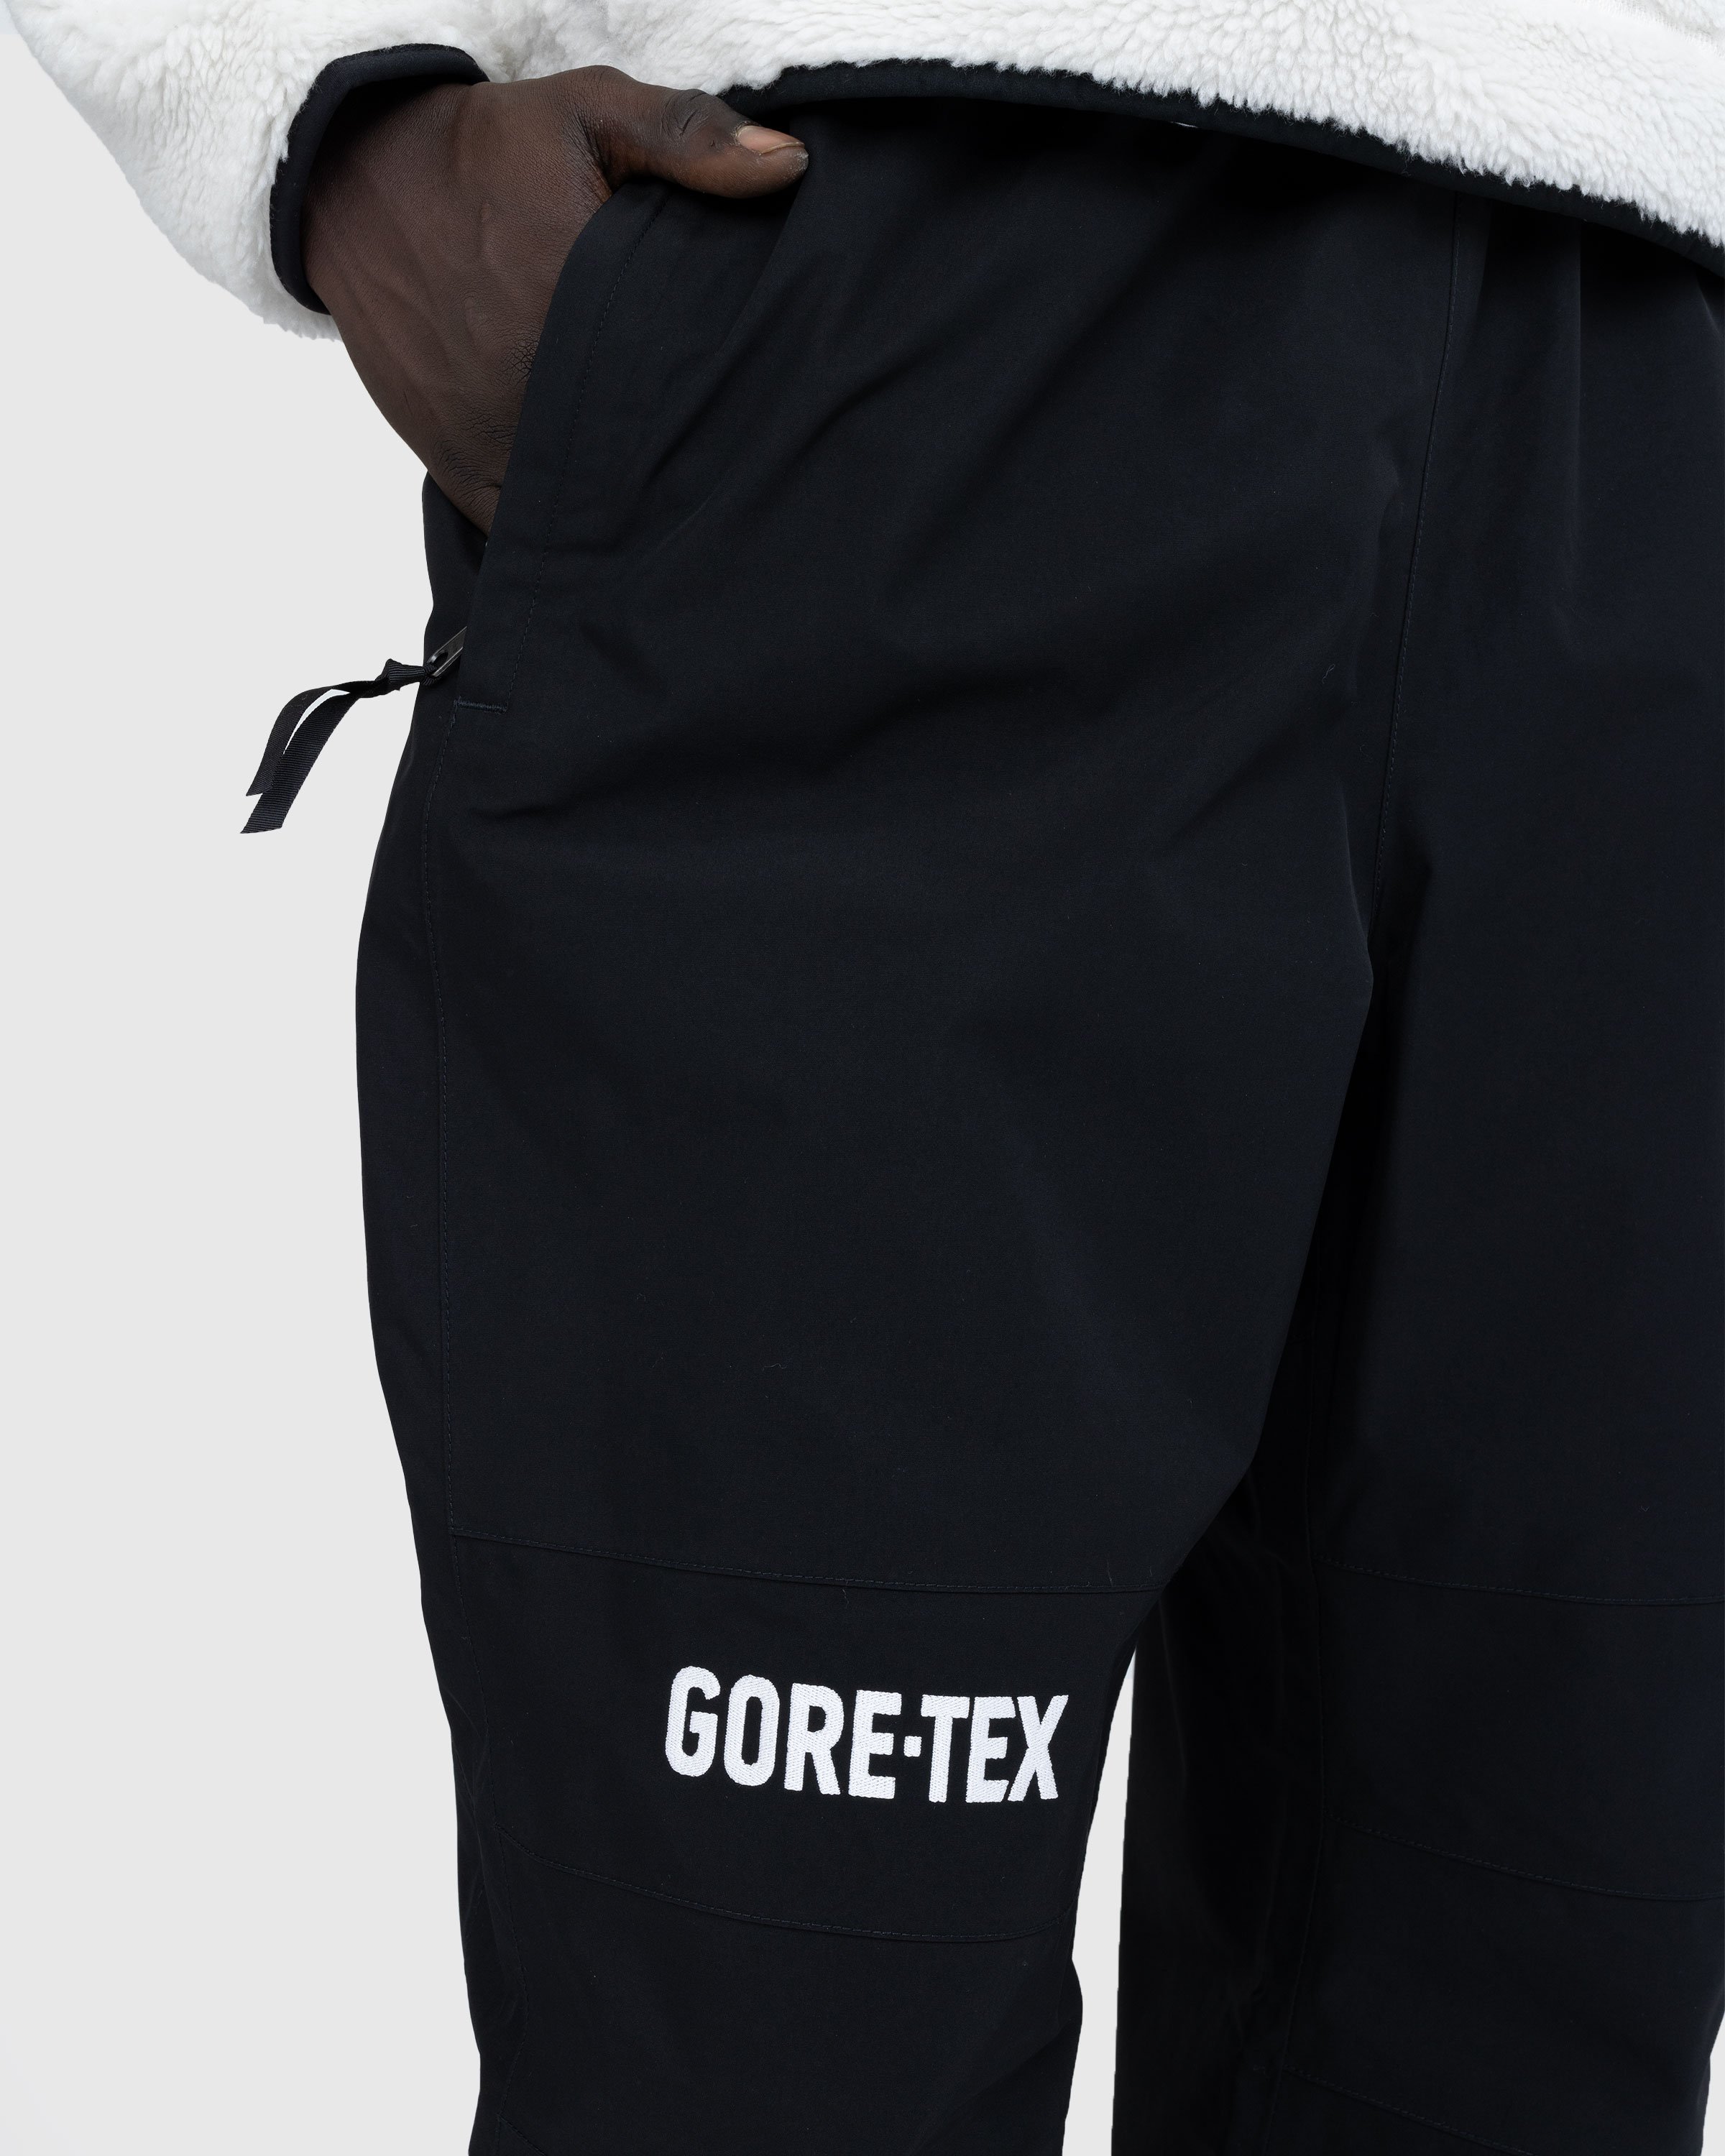 The North Face - GORE-TEX Mountain Pants Black - Clothing - Black - Image 5